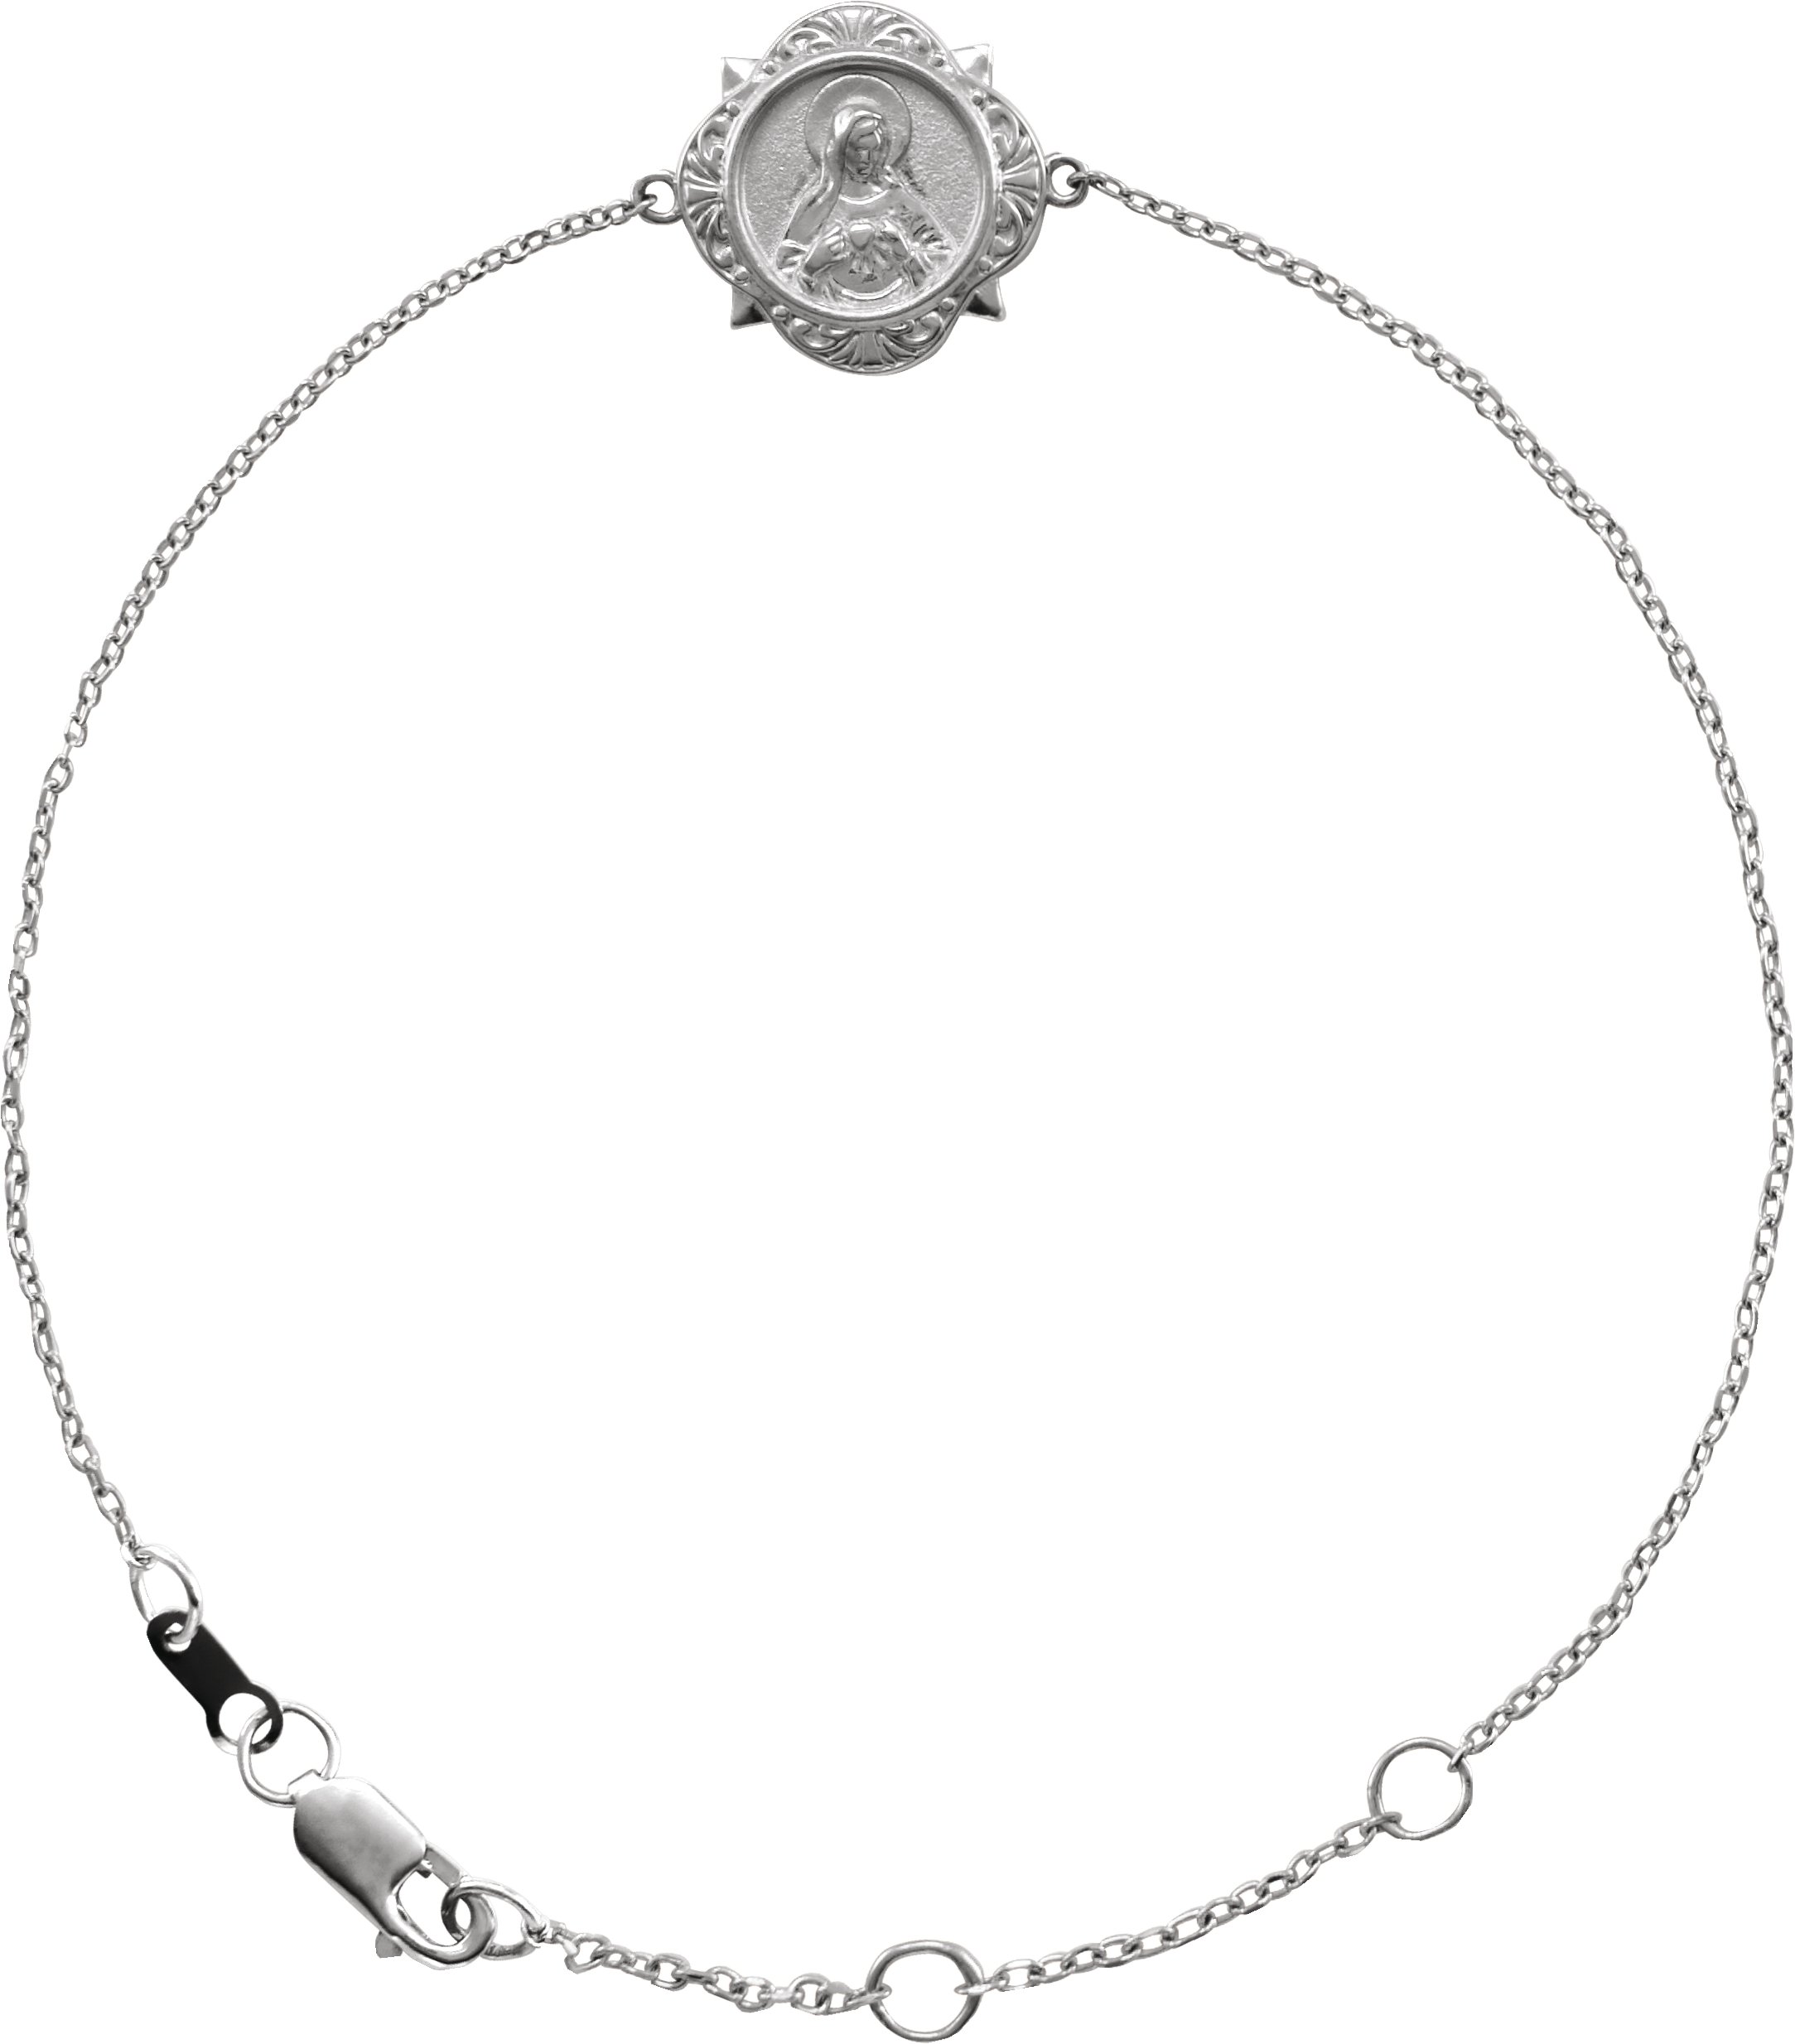 Sterling Silver Miraculous Mary Bracelet